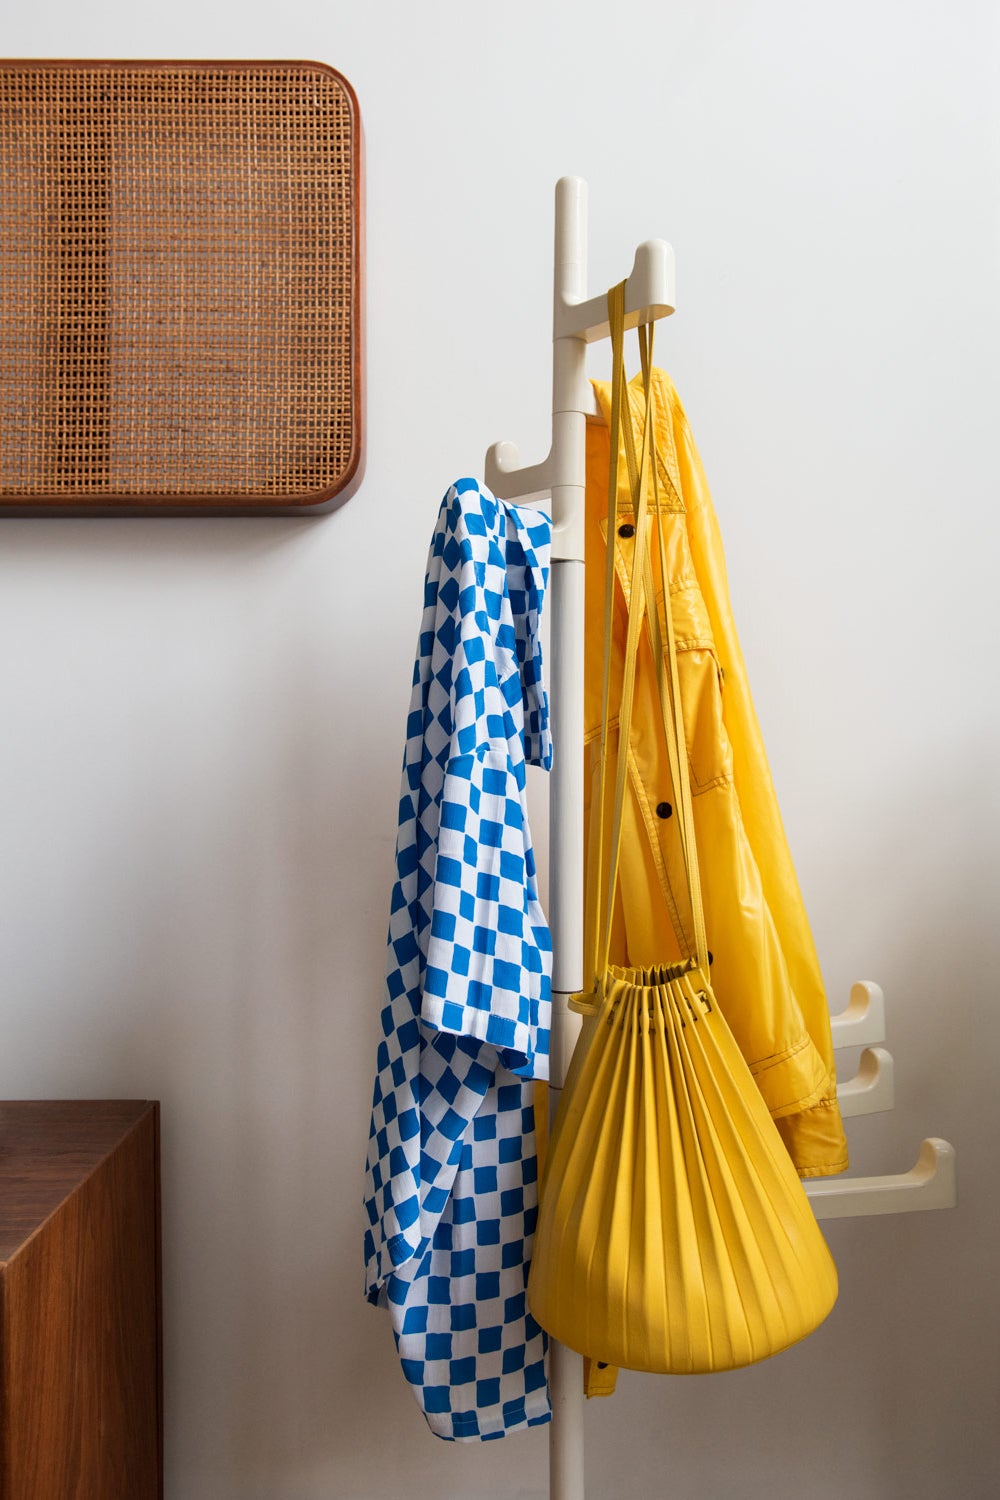 Blue and yellow coats on rack